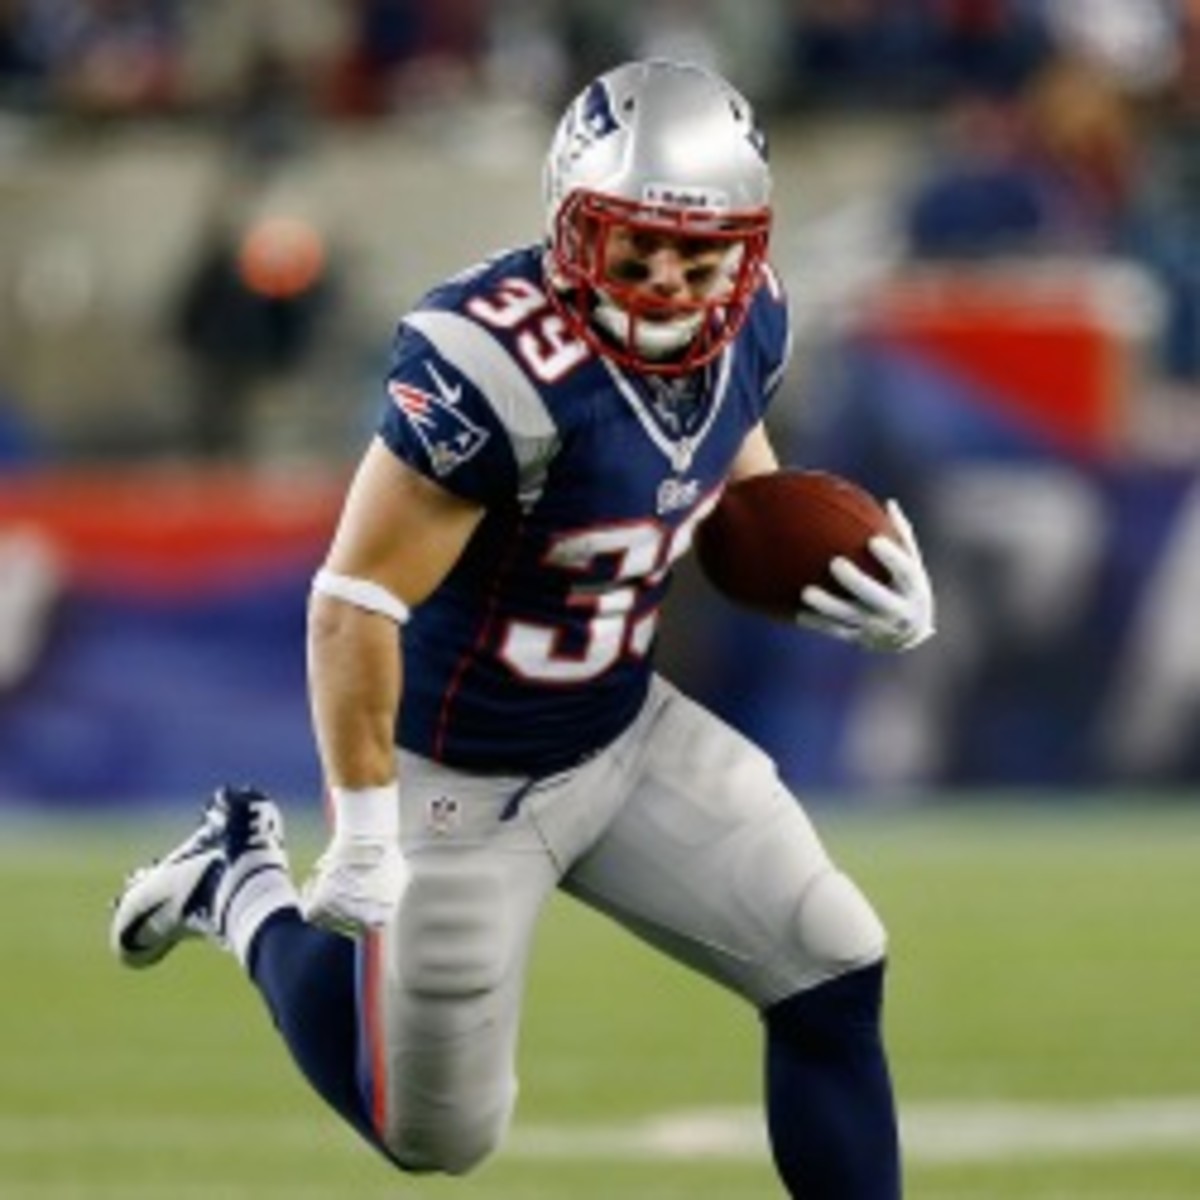 Former Patriot Danny Woodhead signed a two-year deal with the Chargers. (Jared Wickerham/Getty Images)